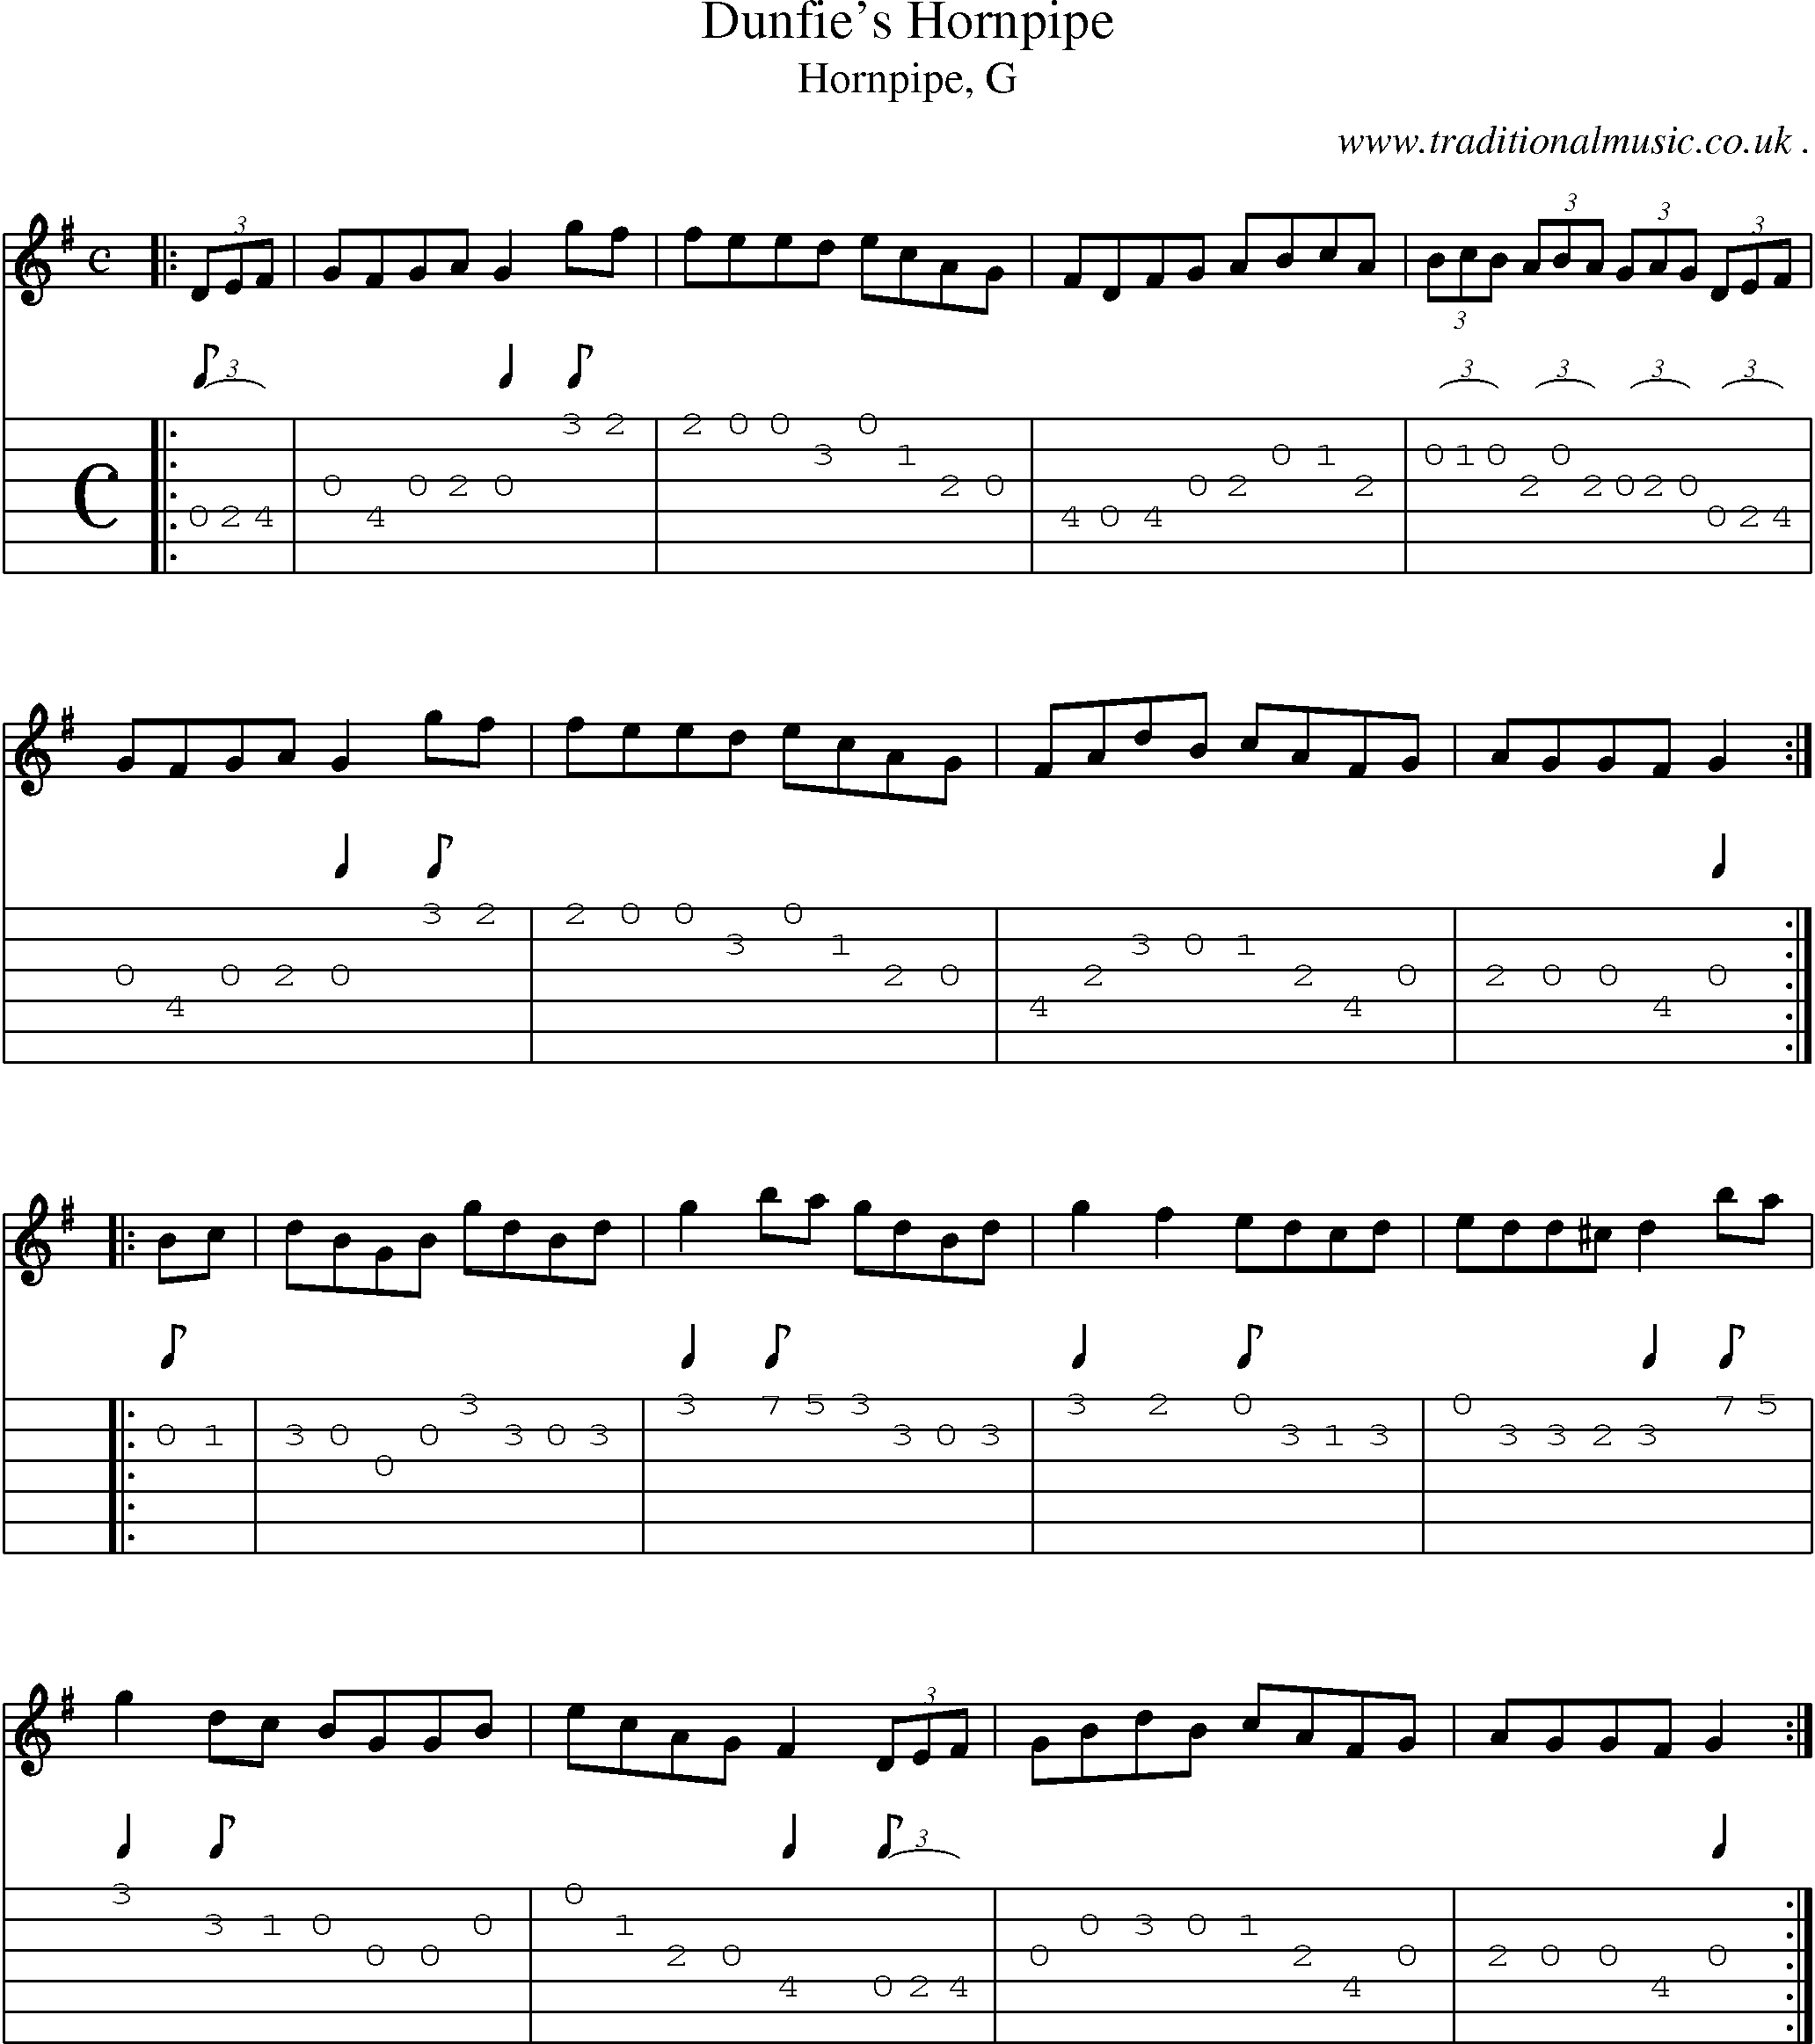 Sheet-music  score, Chords and Guitar Tabs for Dunfies Hornpipe